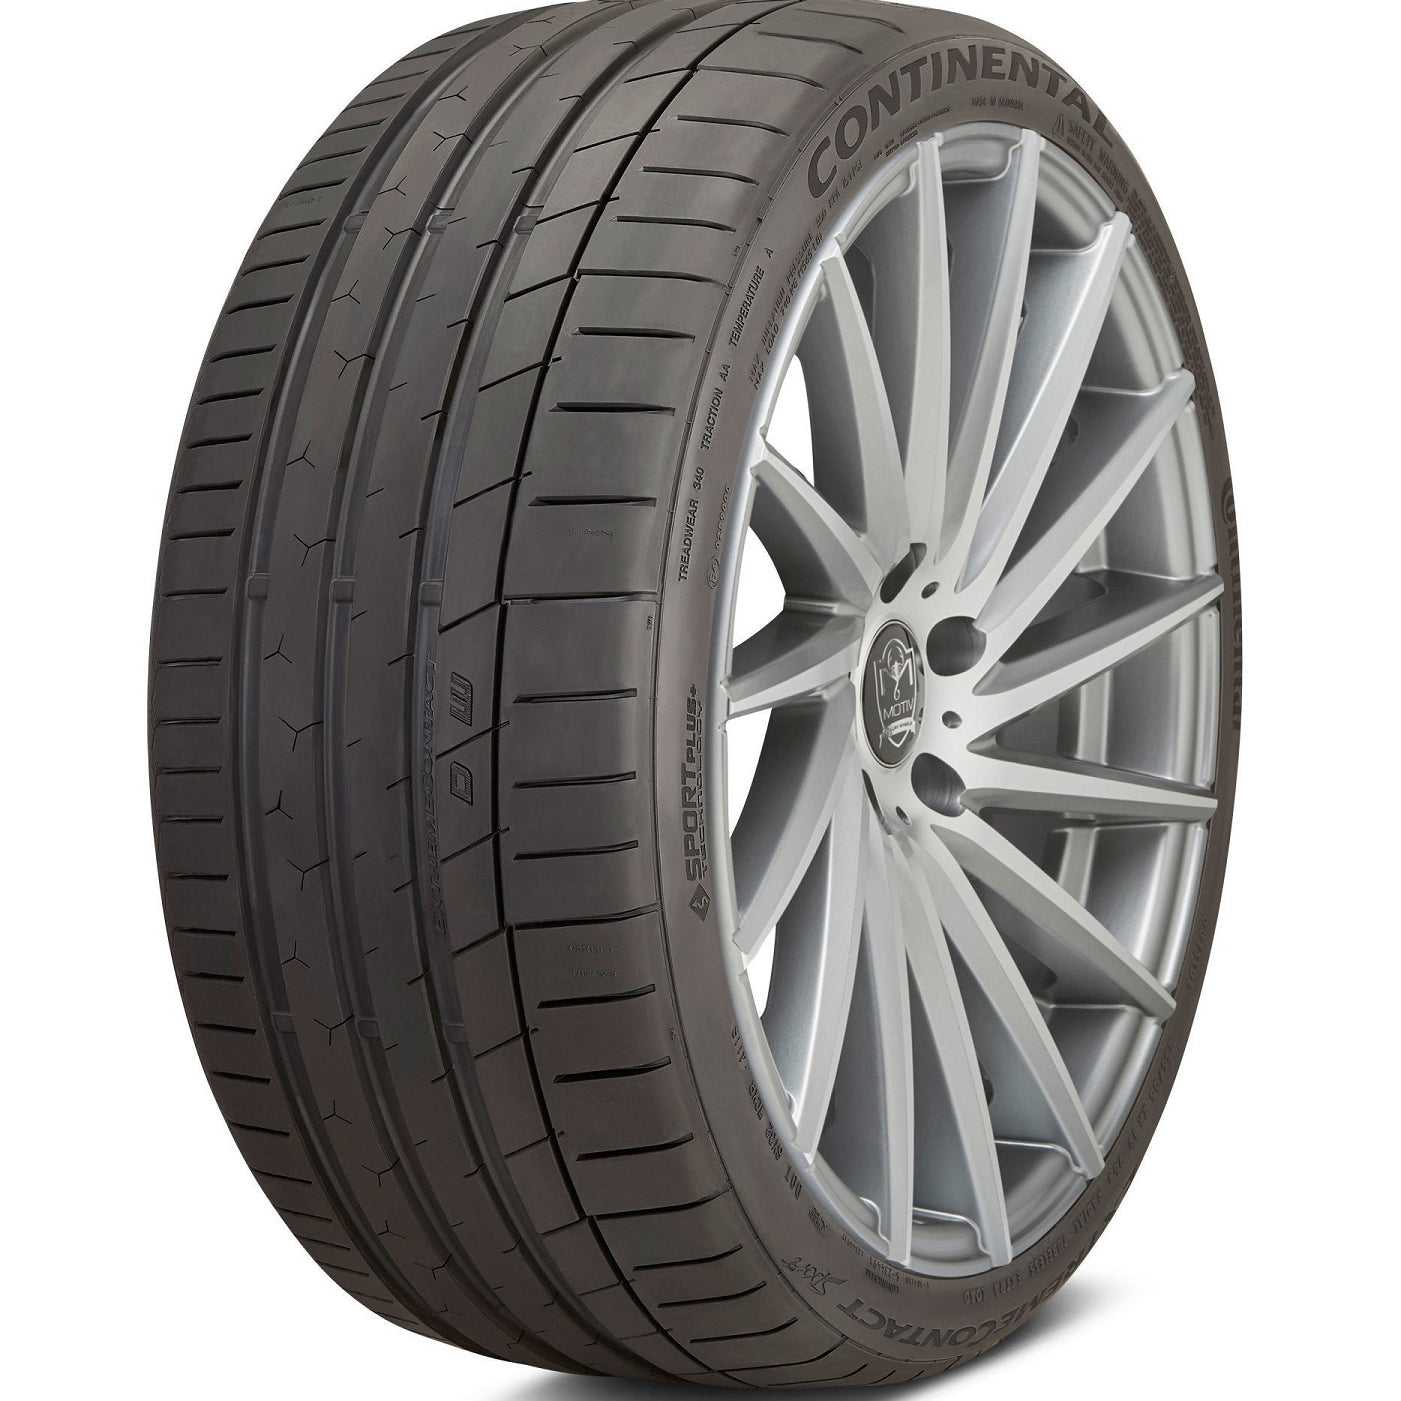 CONTINENTAL EXTREMECONTACT SPORT 225/40ZR18 (25.1X8.9R 18) Tires